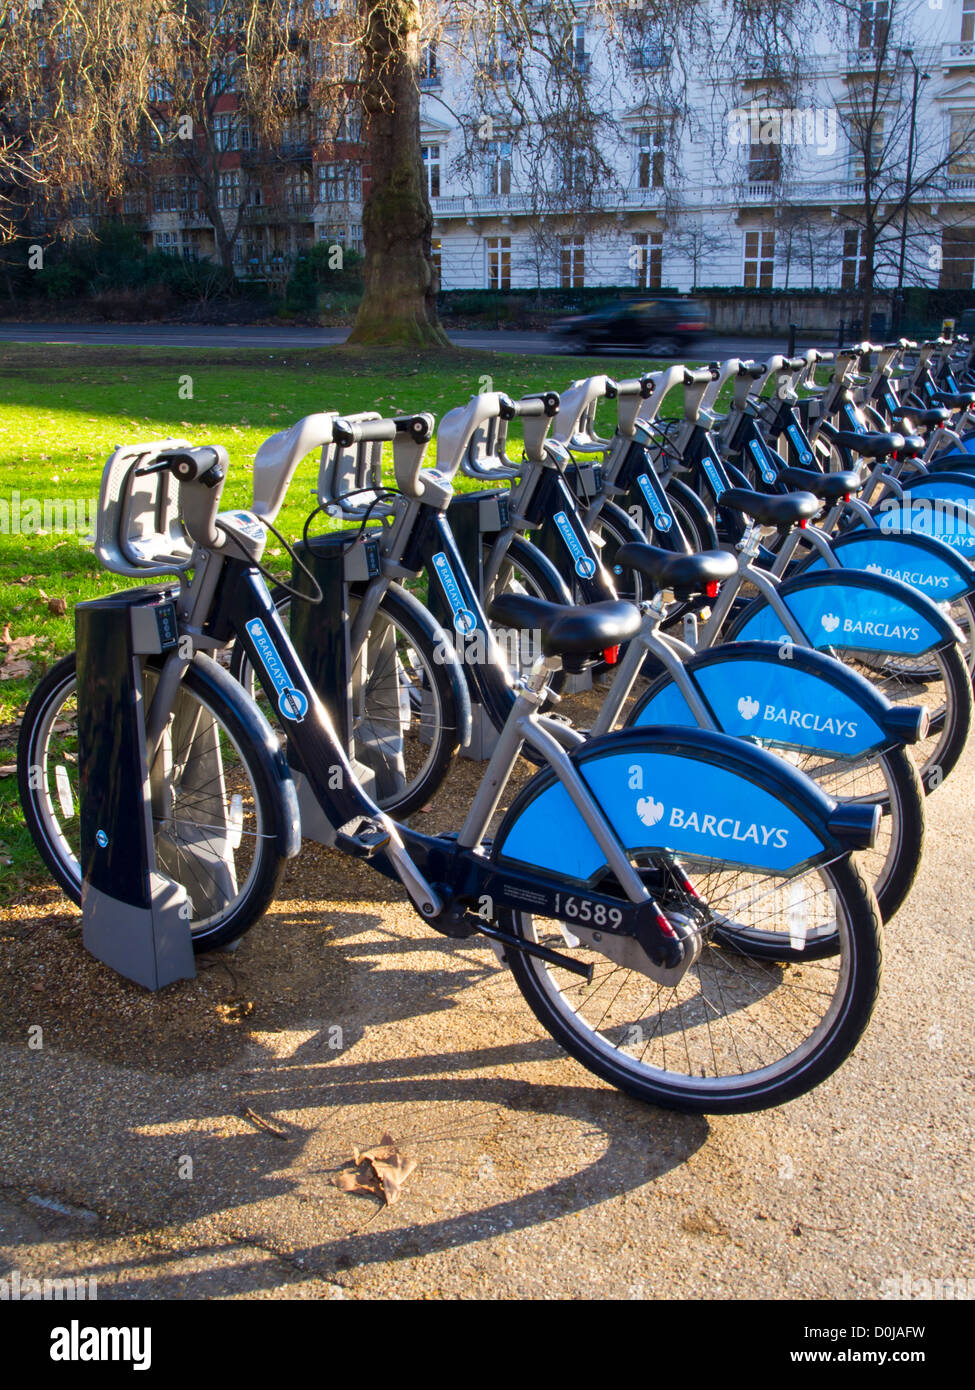 Rows of bikes at Barclays cycle hire docking station in Hyde Park. Stock Photo